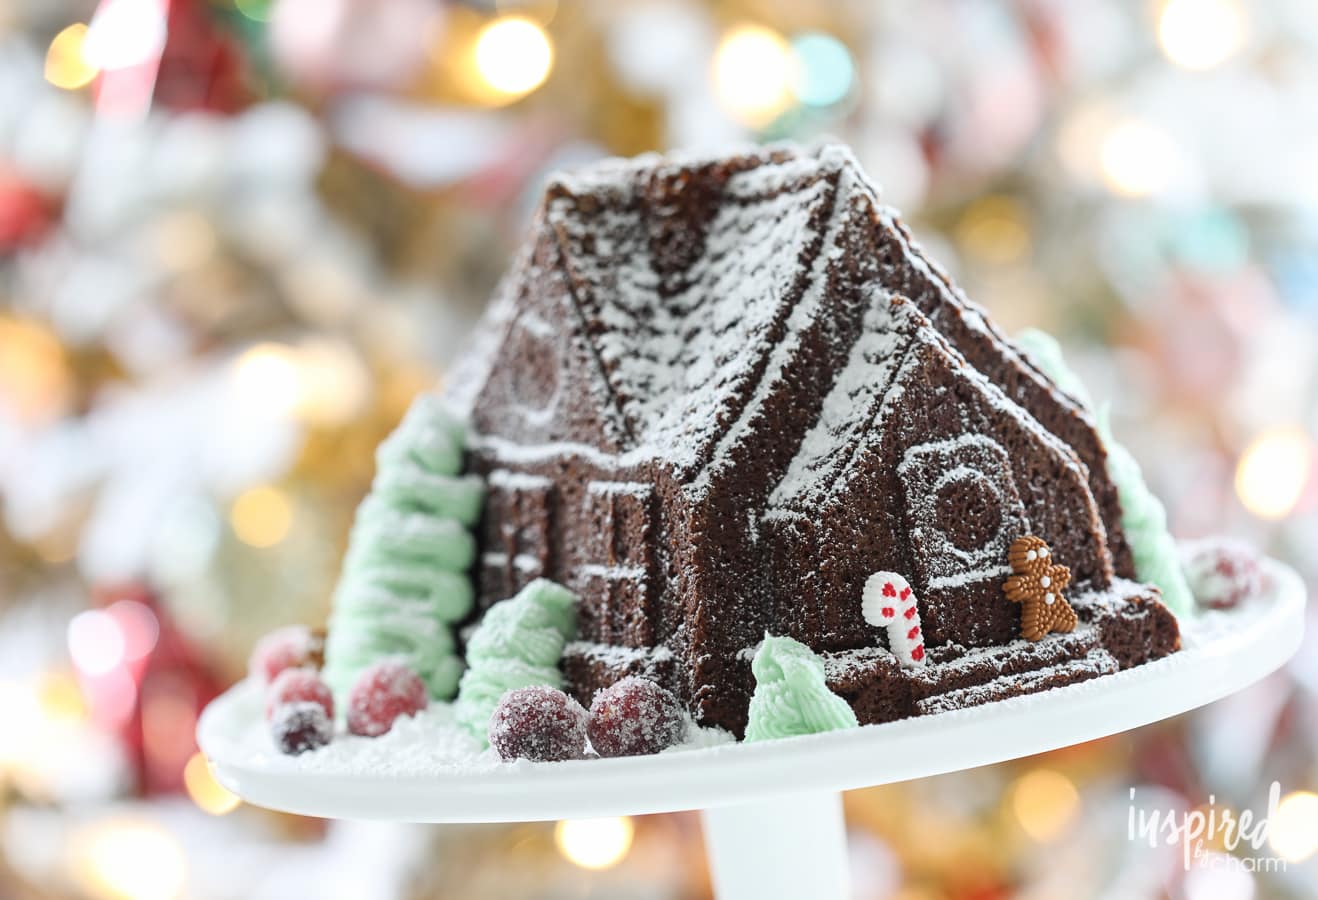 This Gingerbread House Gingerbread Cake is the perfect holiday treat! #dessert #holiday #christmas #gingerbread #recipe